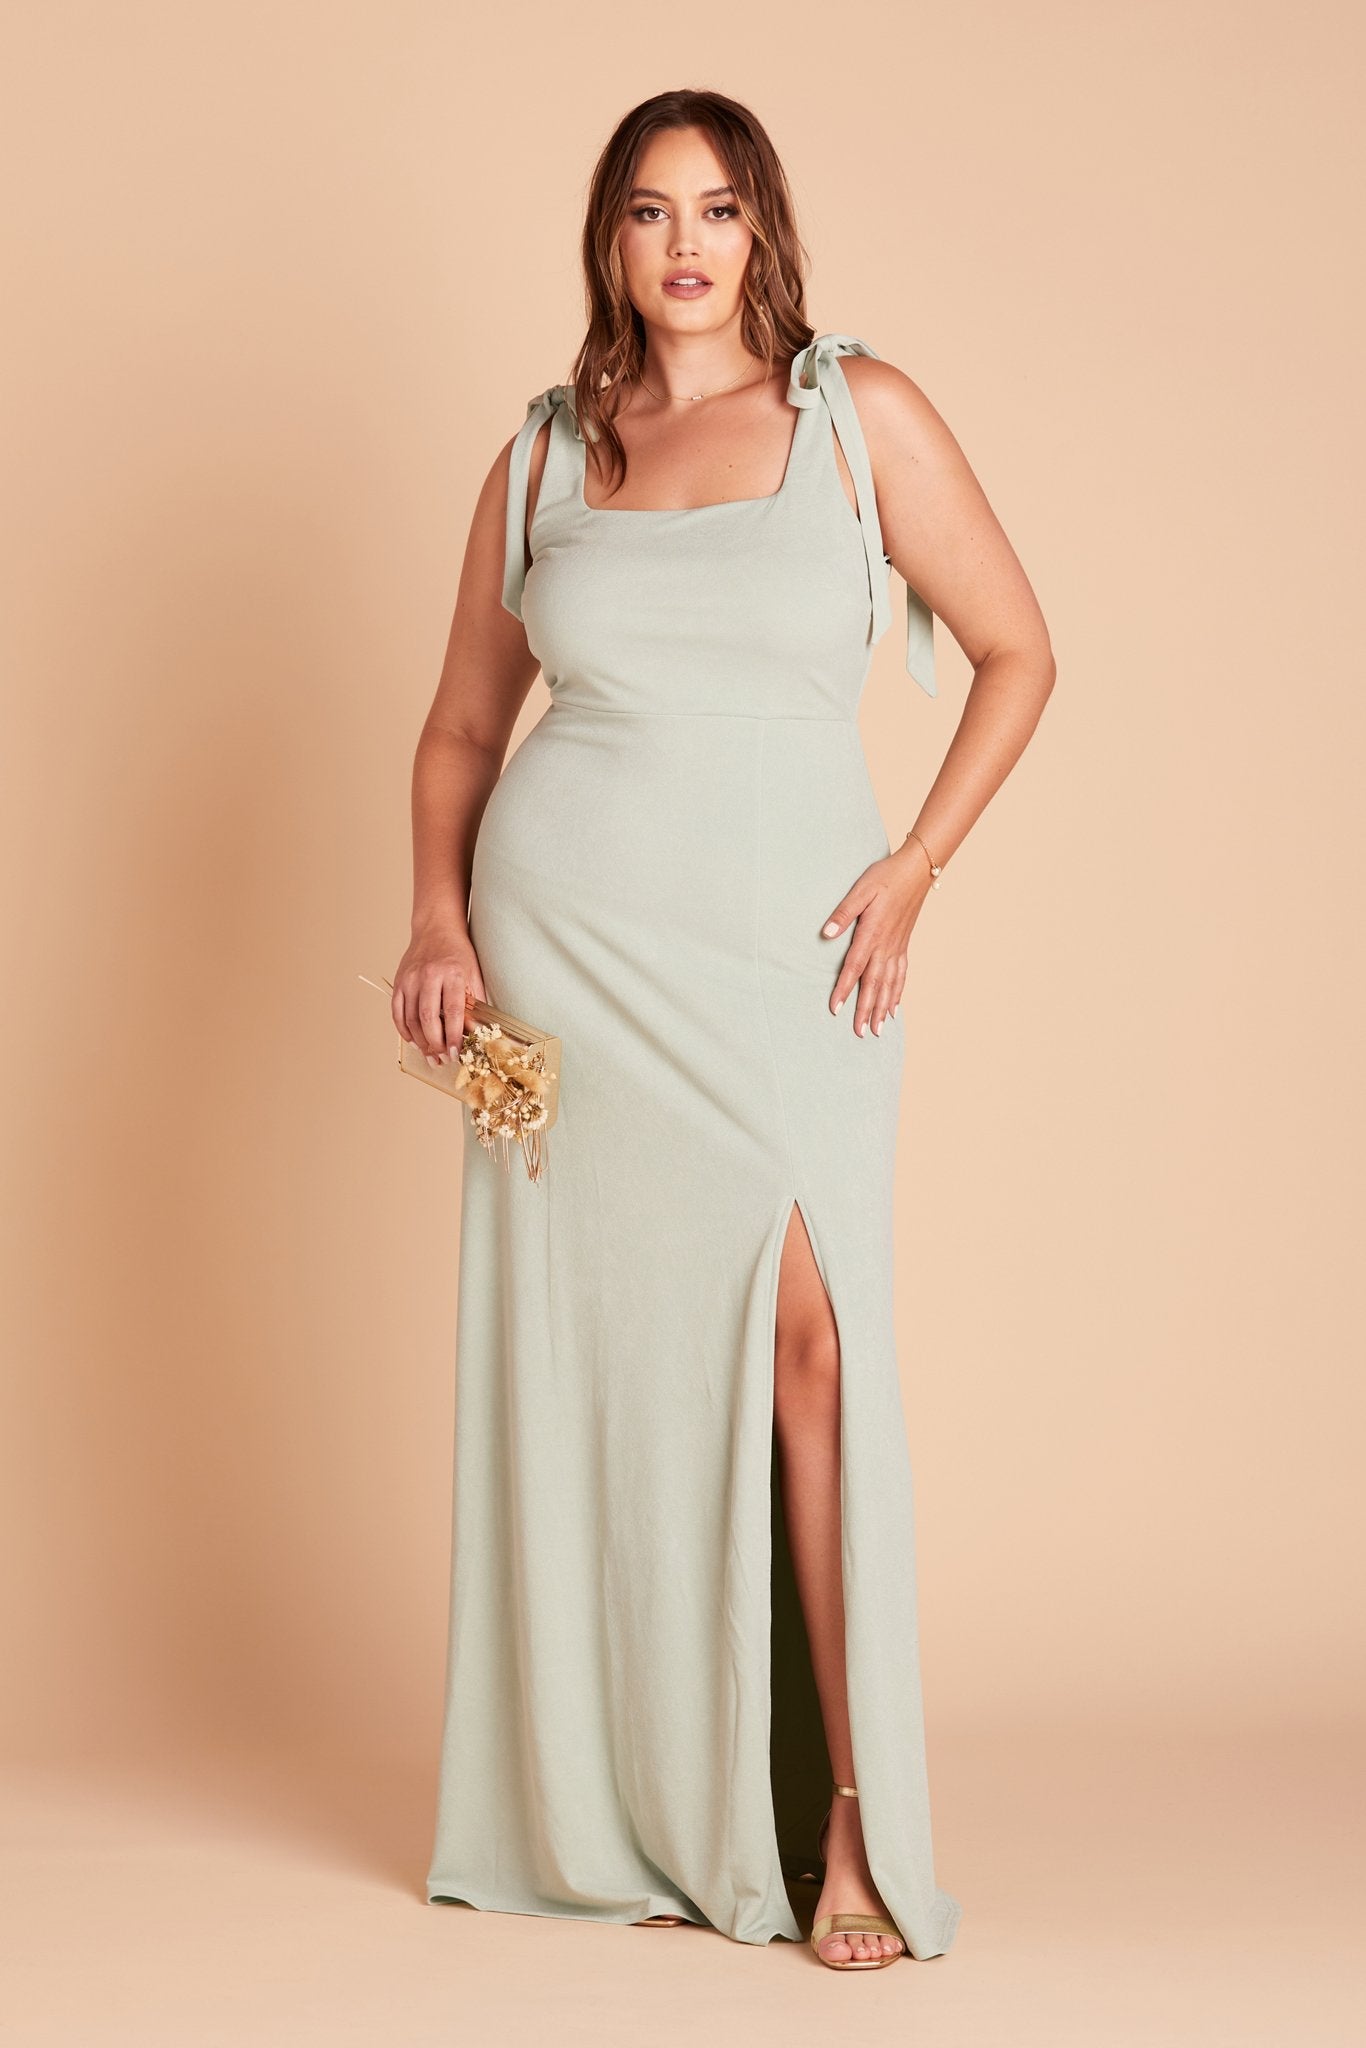 Front view of the Alex Convertible Plus Size Bridesmaid Dress in sage green crepe with shoulder ties that are tied in a bow and draped down over each shoulder.